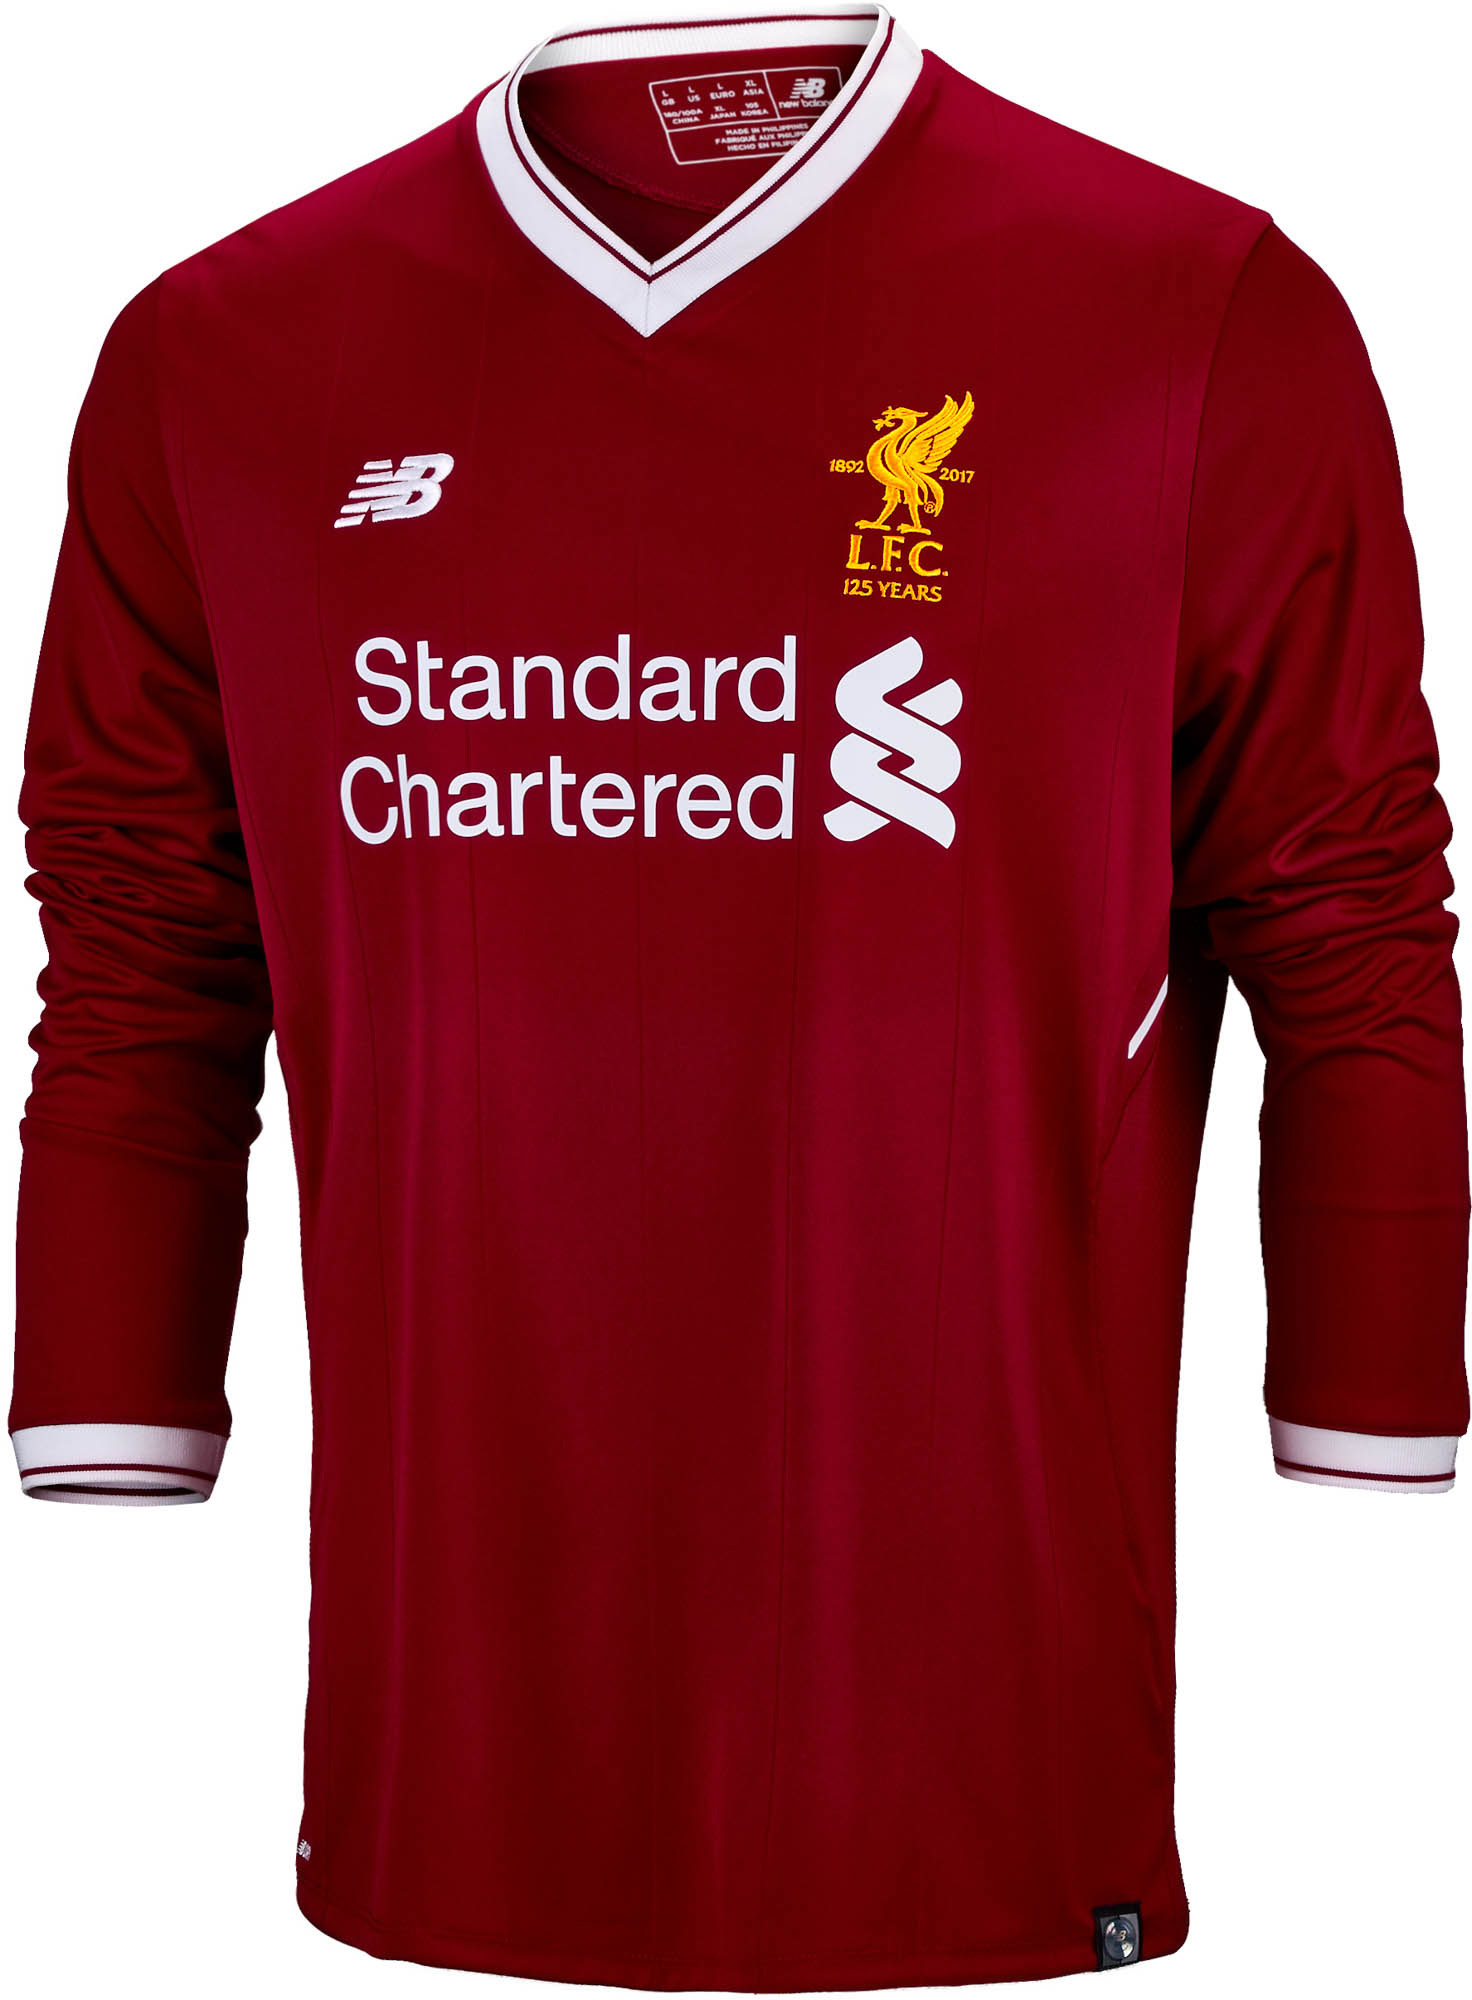 Liverpool kit: All the new Reds jerseys for the 2017-18 season